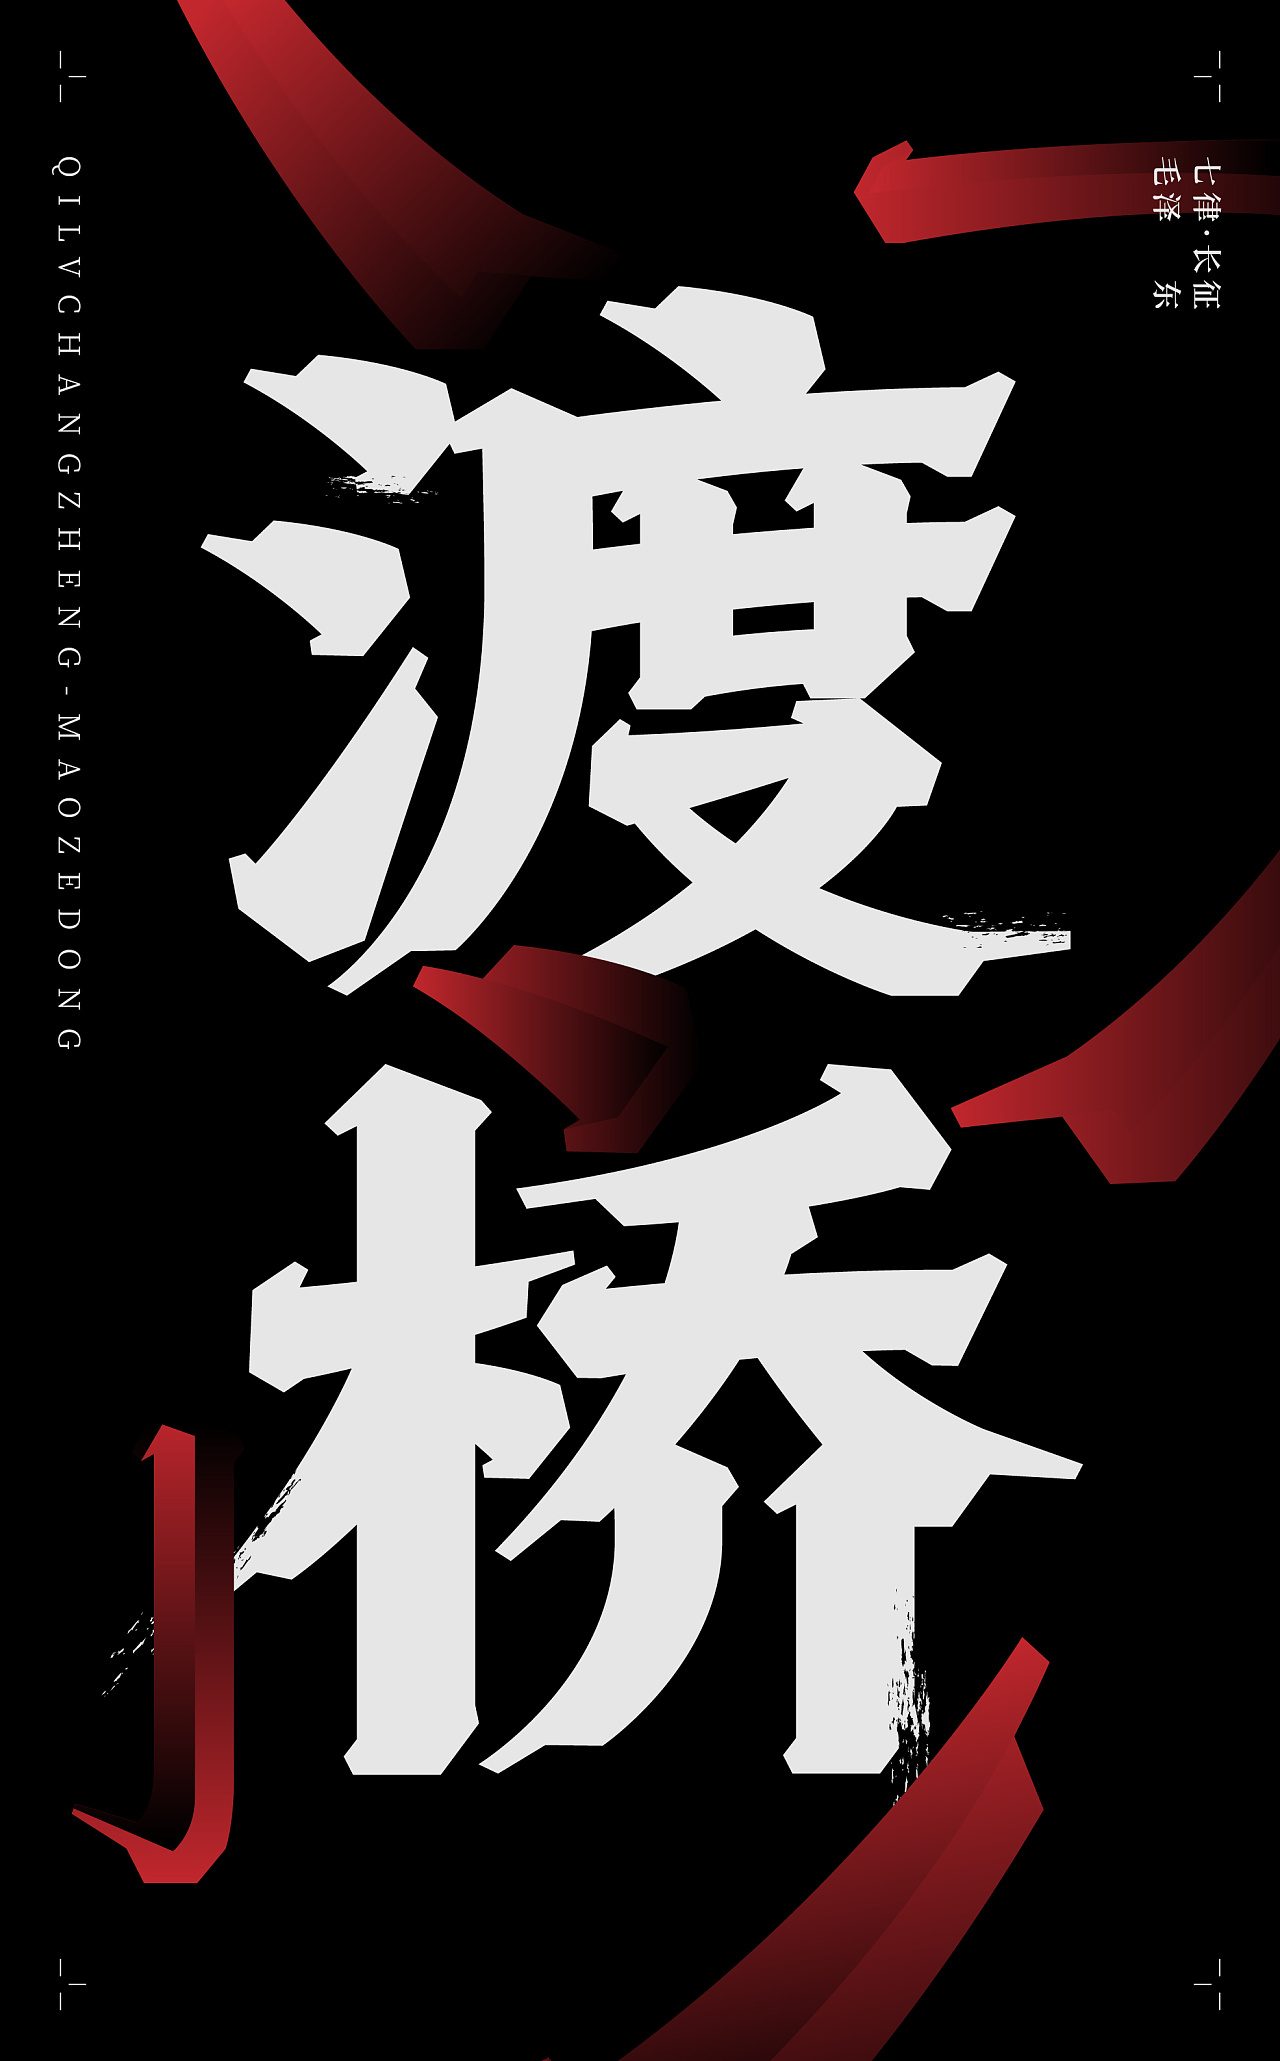 Chinese Creative Font Design-Font Design of Ancient Poems-Seven Rhymes and Long March